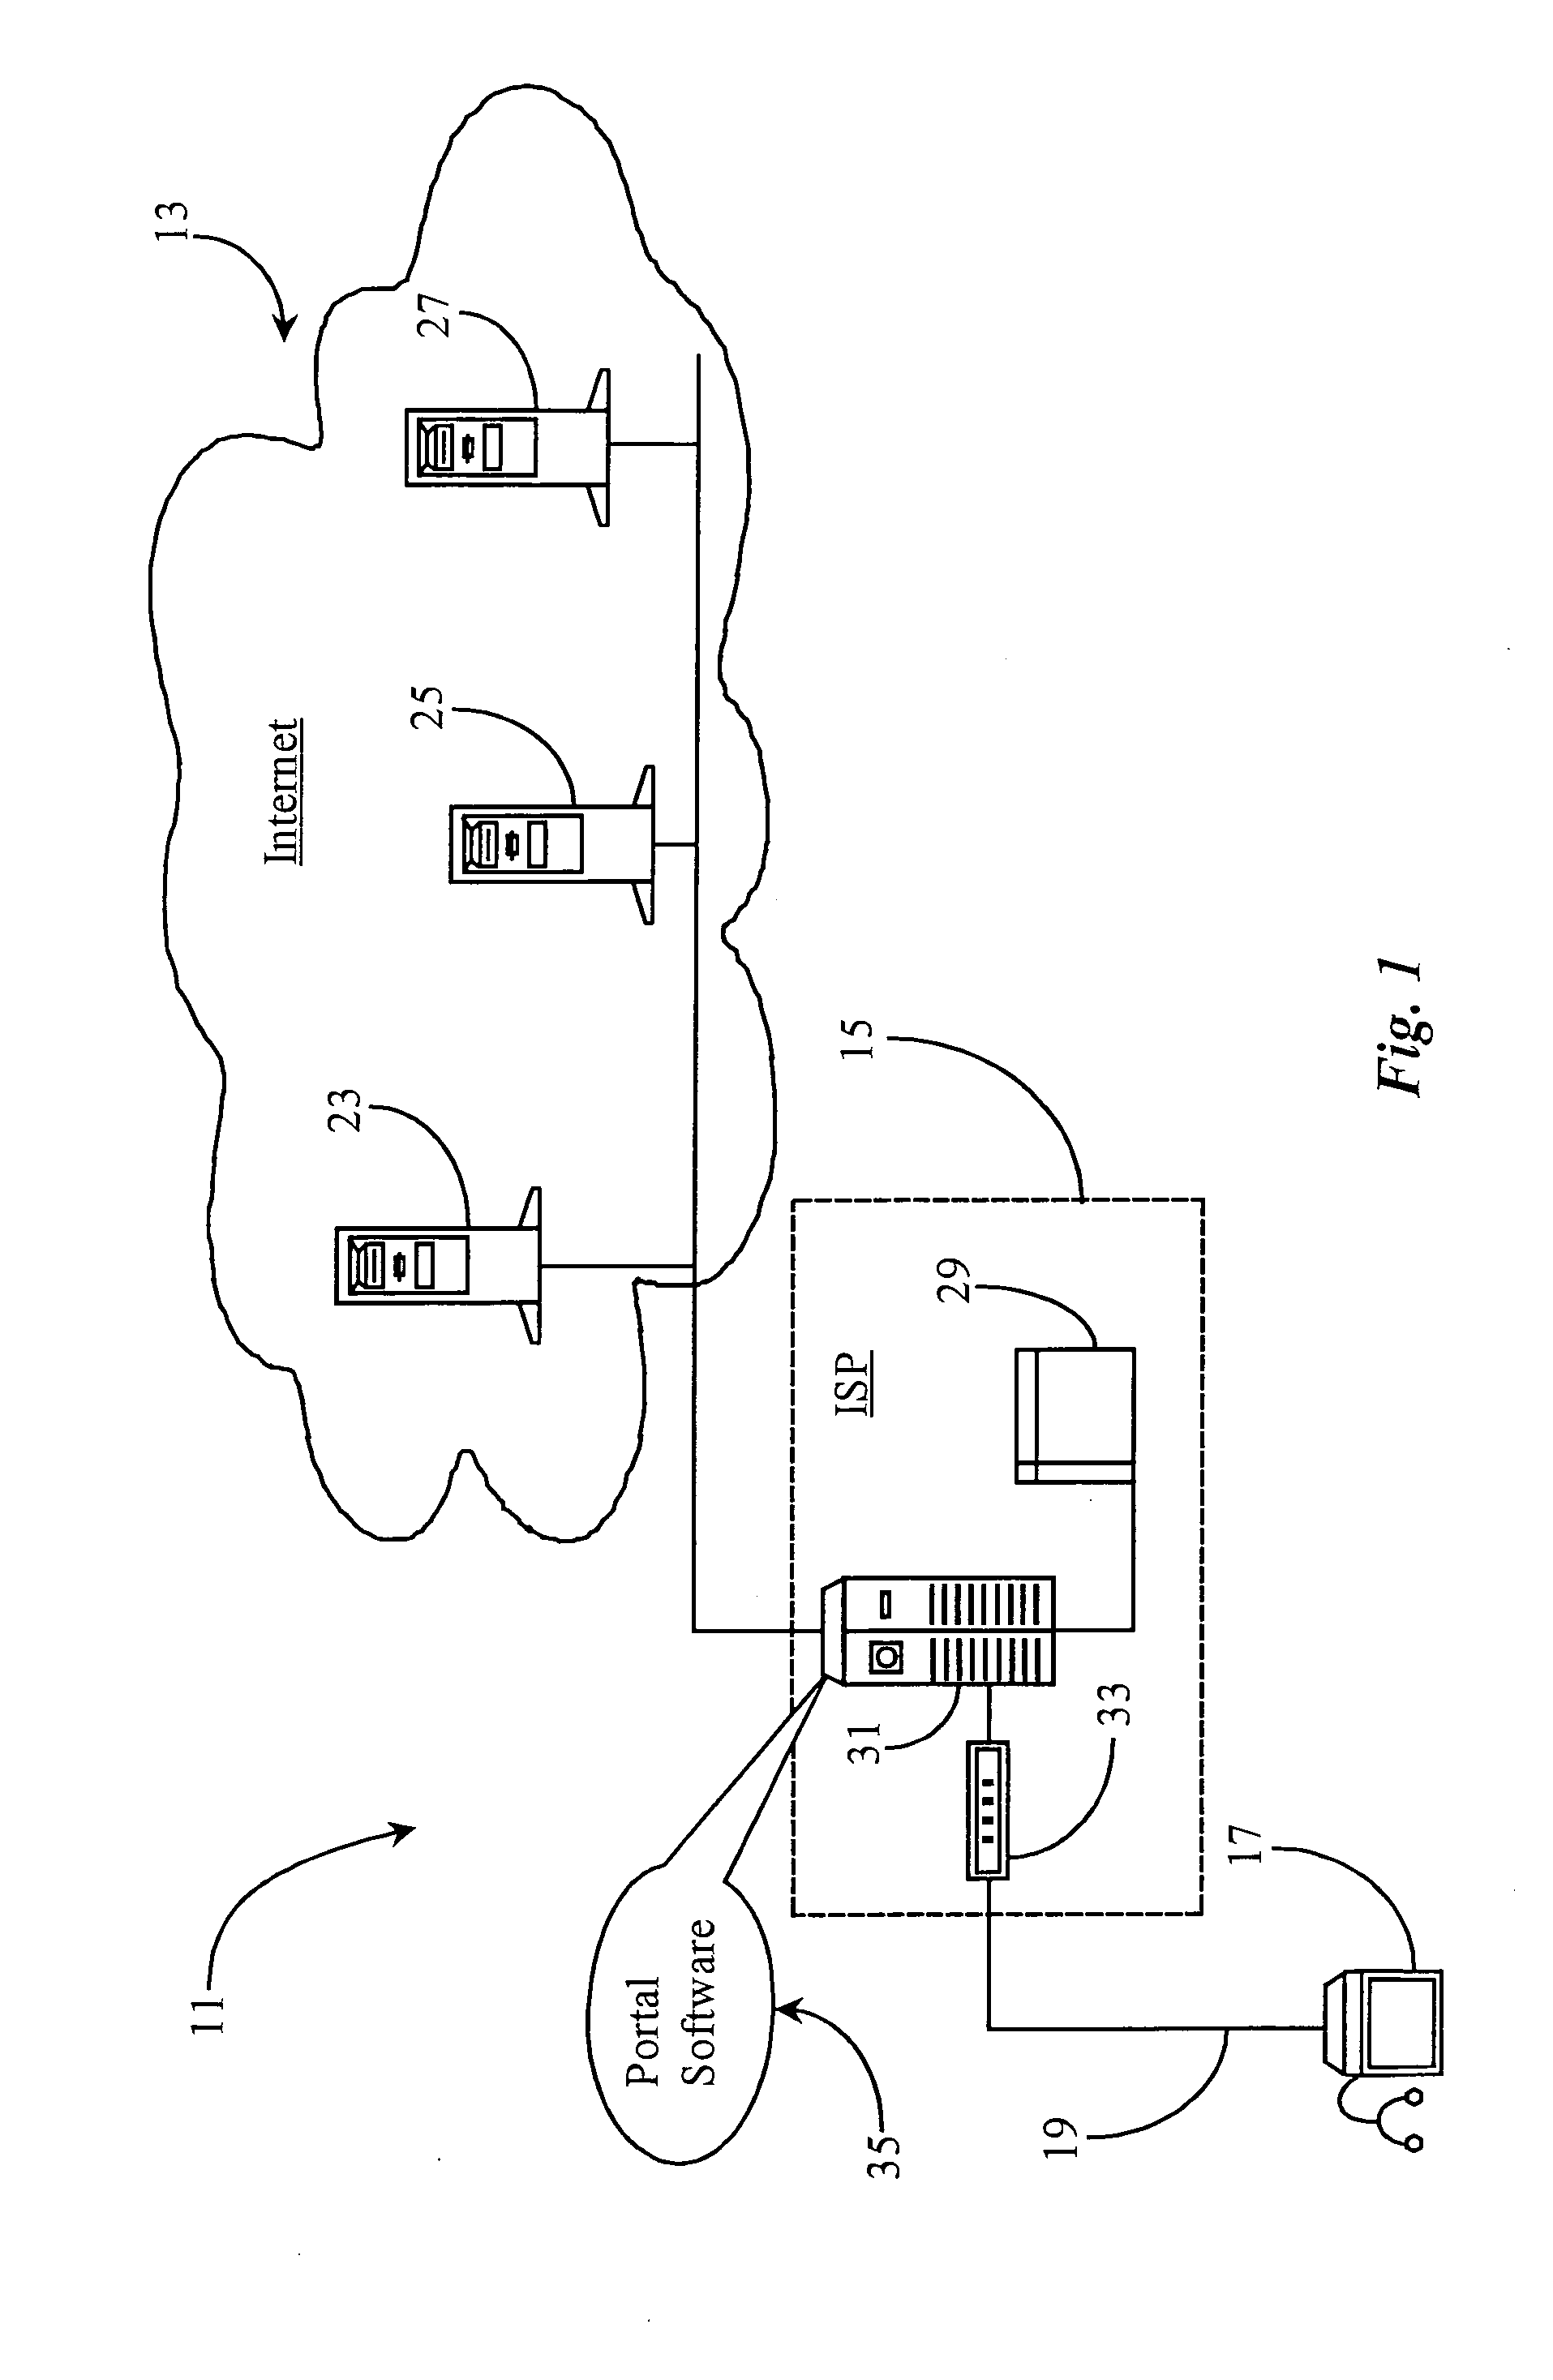 Method and apparatus for tracking functional states of a Web-site and reporting results to Web developers